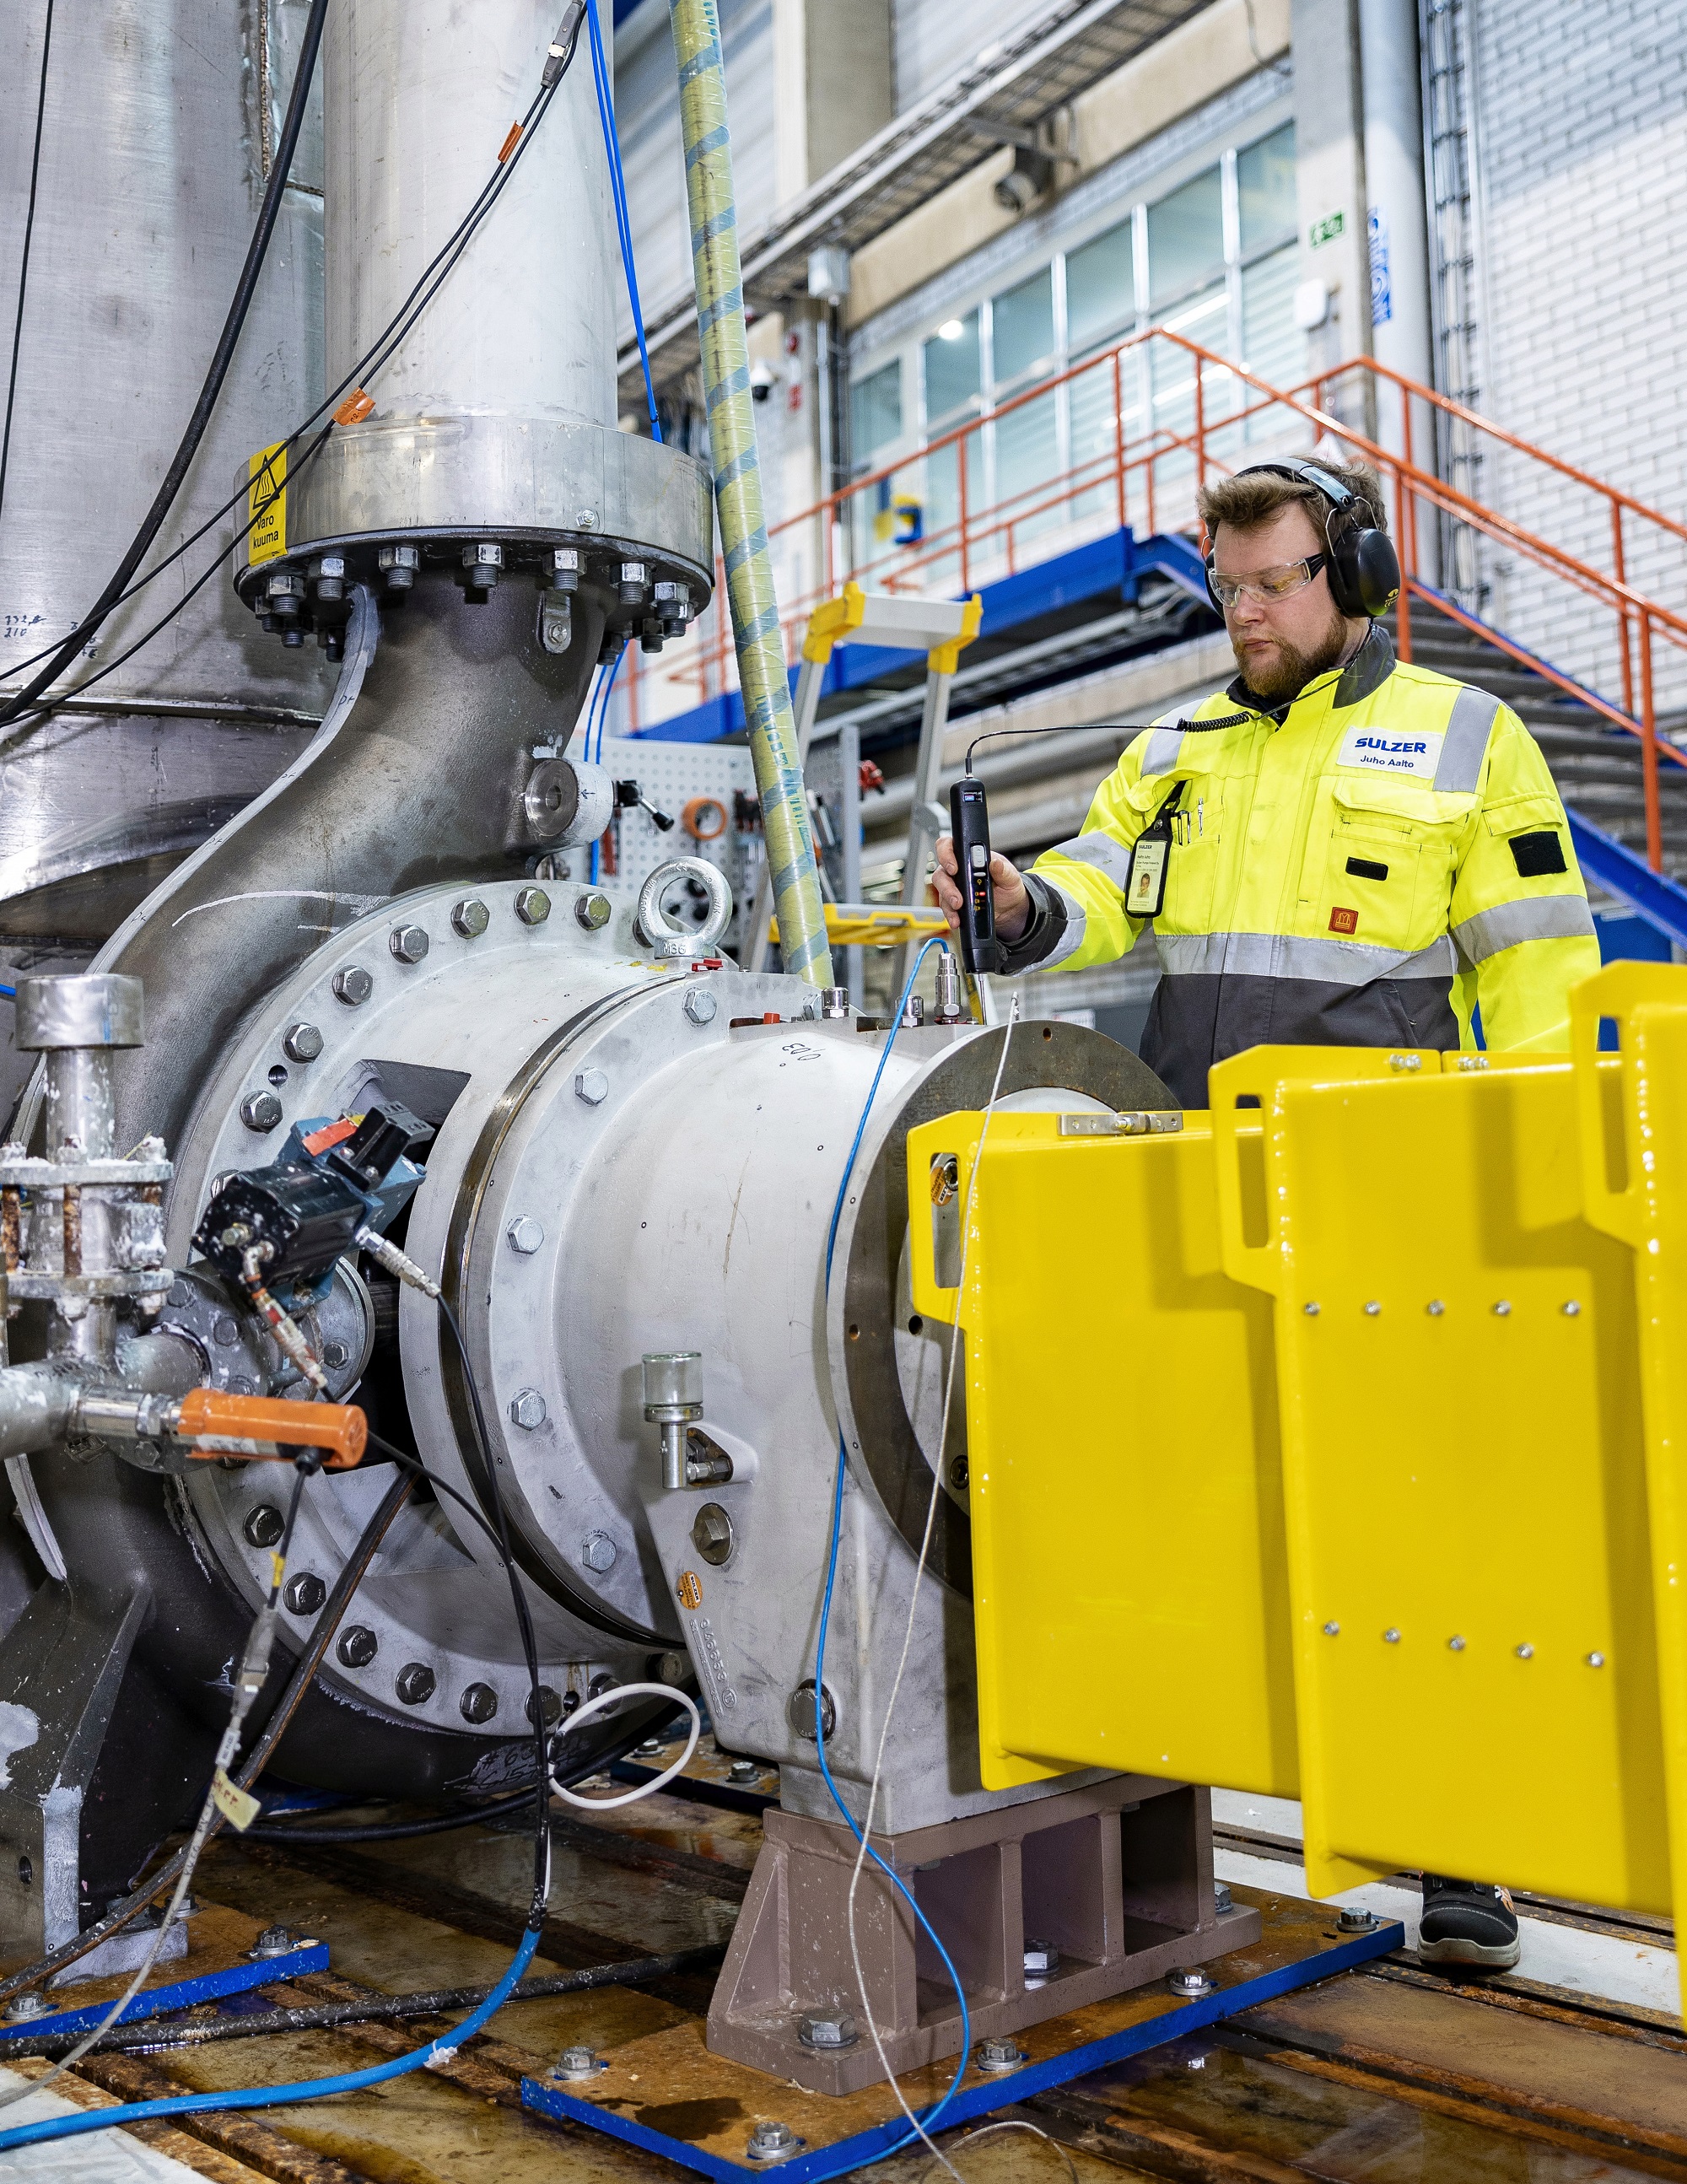 The MCE pump being tested at Sulzer’s full-scale R&D centre in Kotka, Finland.